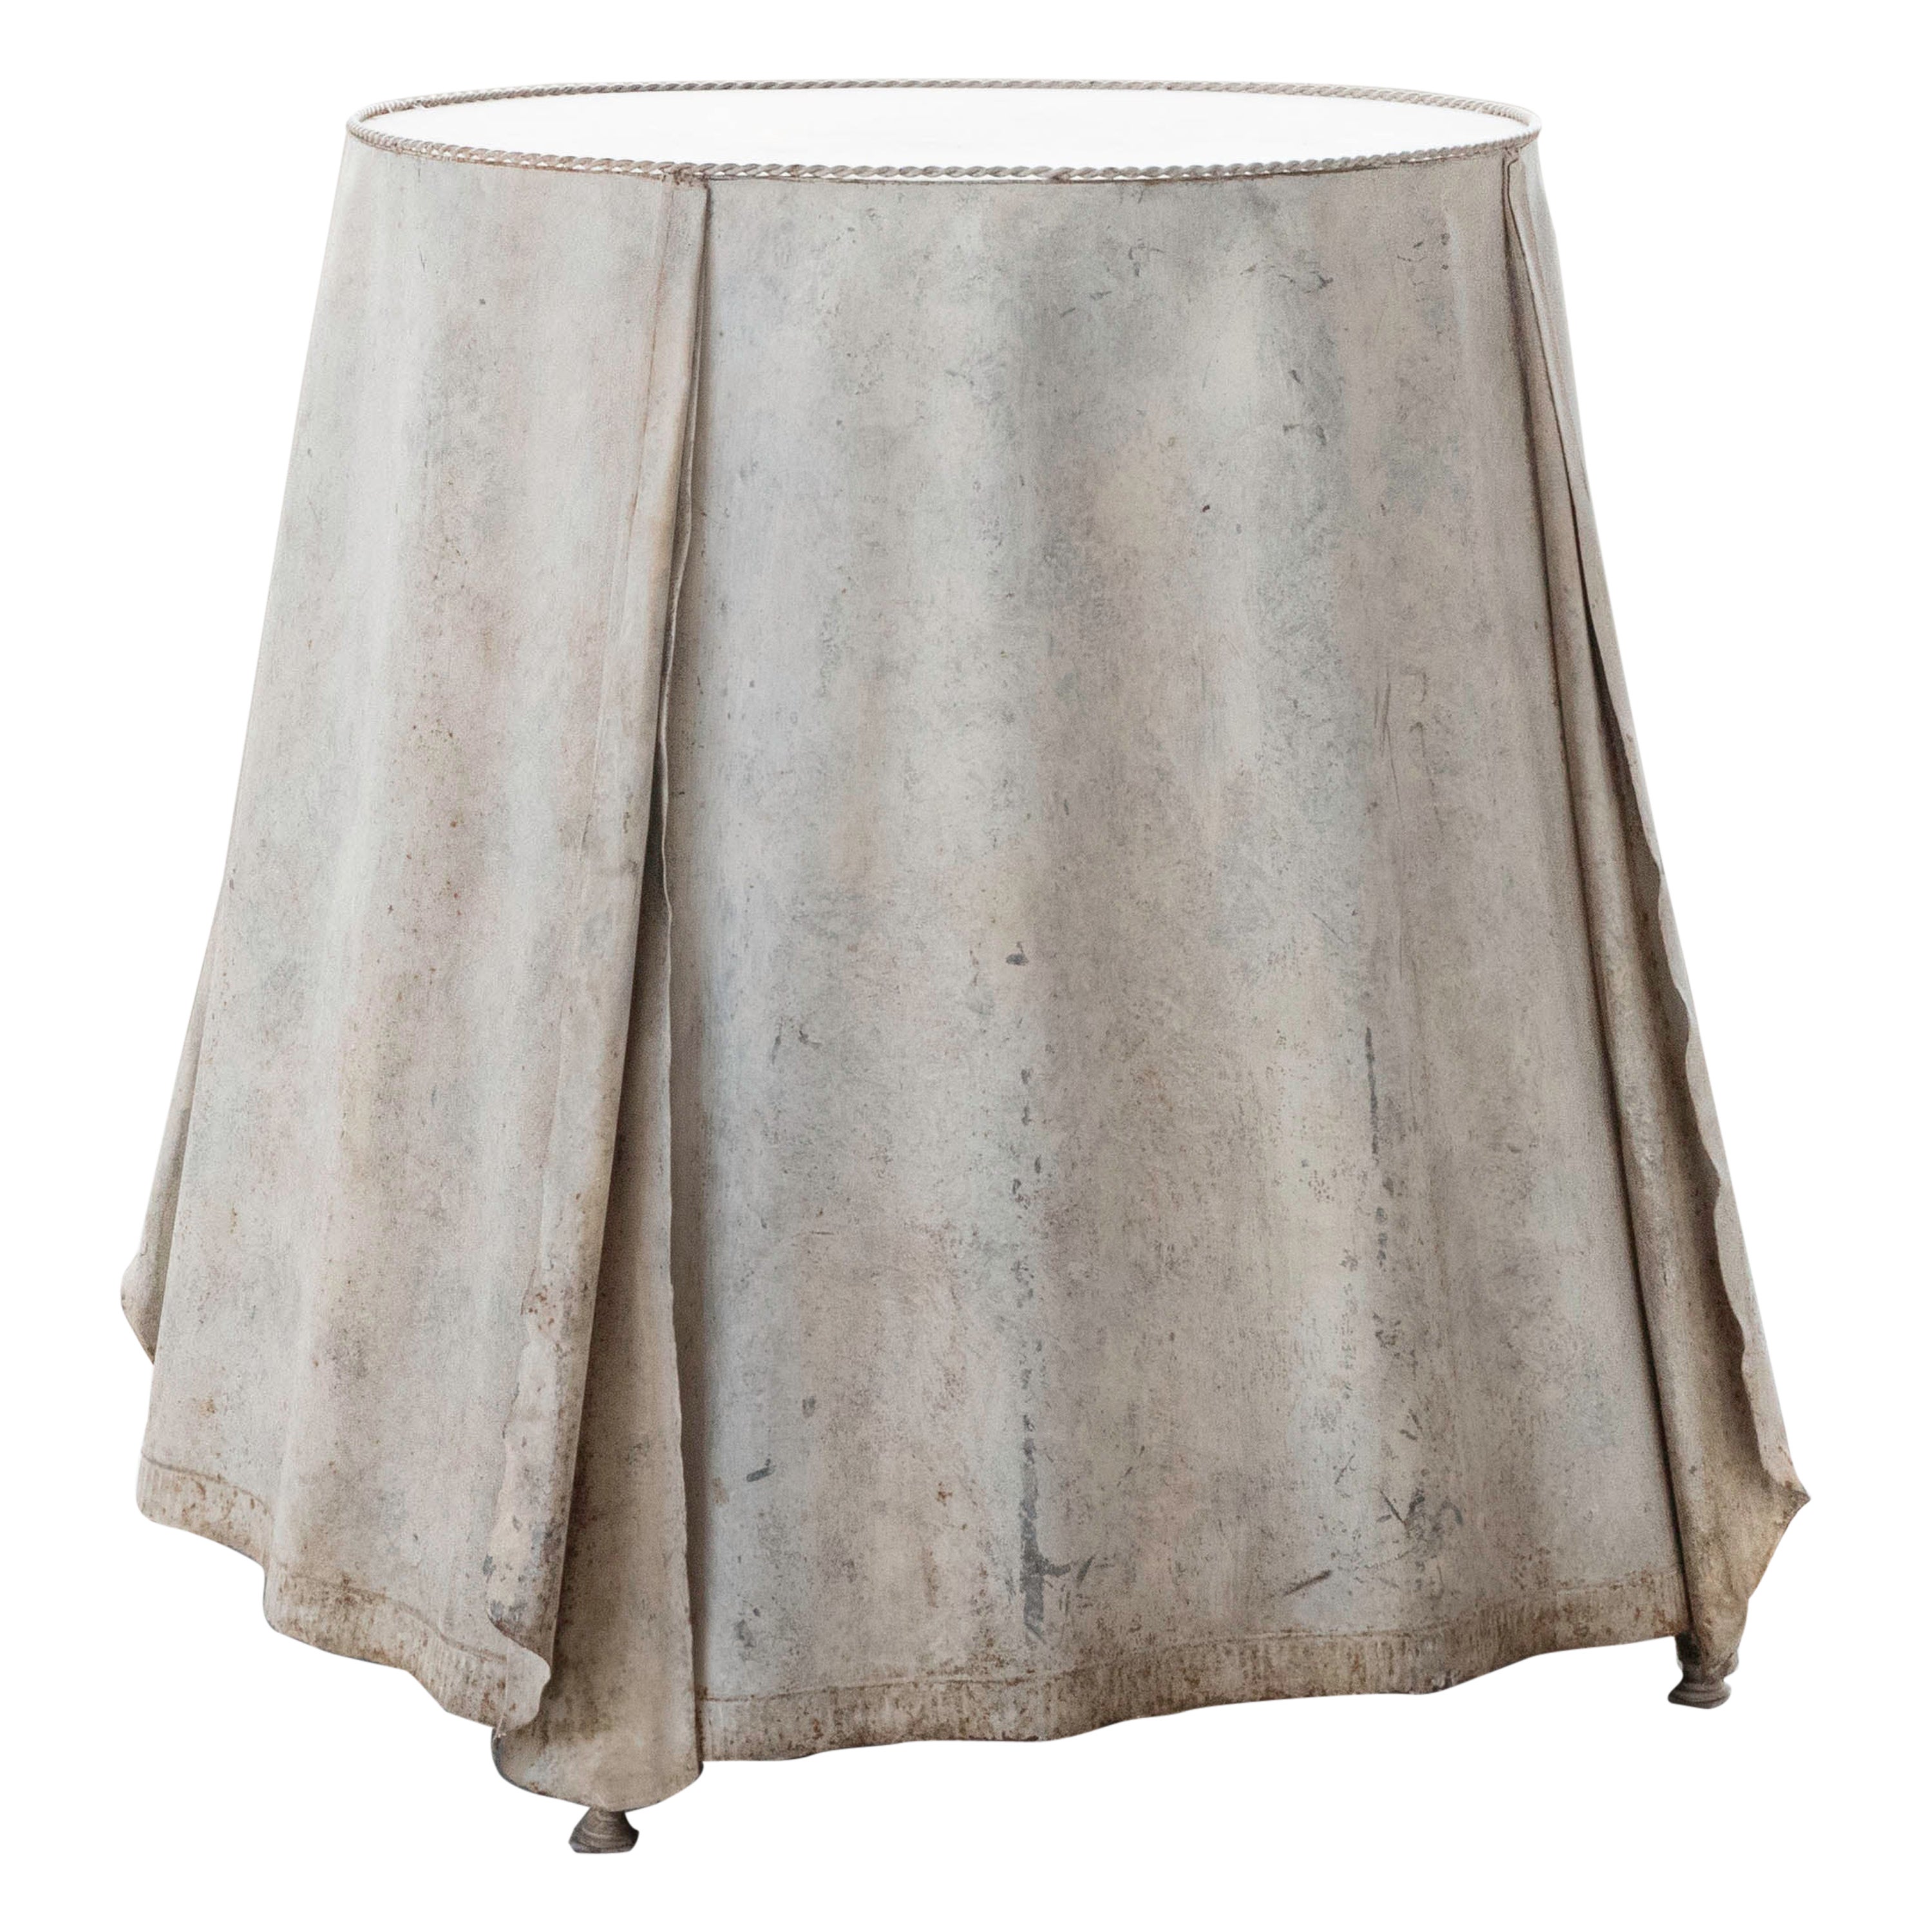 Trompe L'oeil Galvanized Steel Draped Occasional Table, Made in Italy